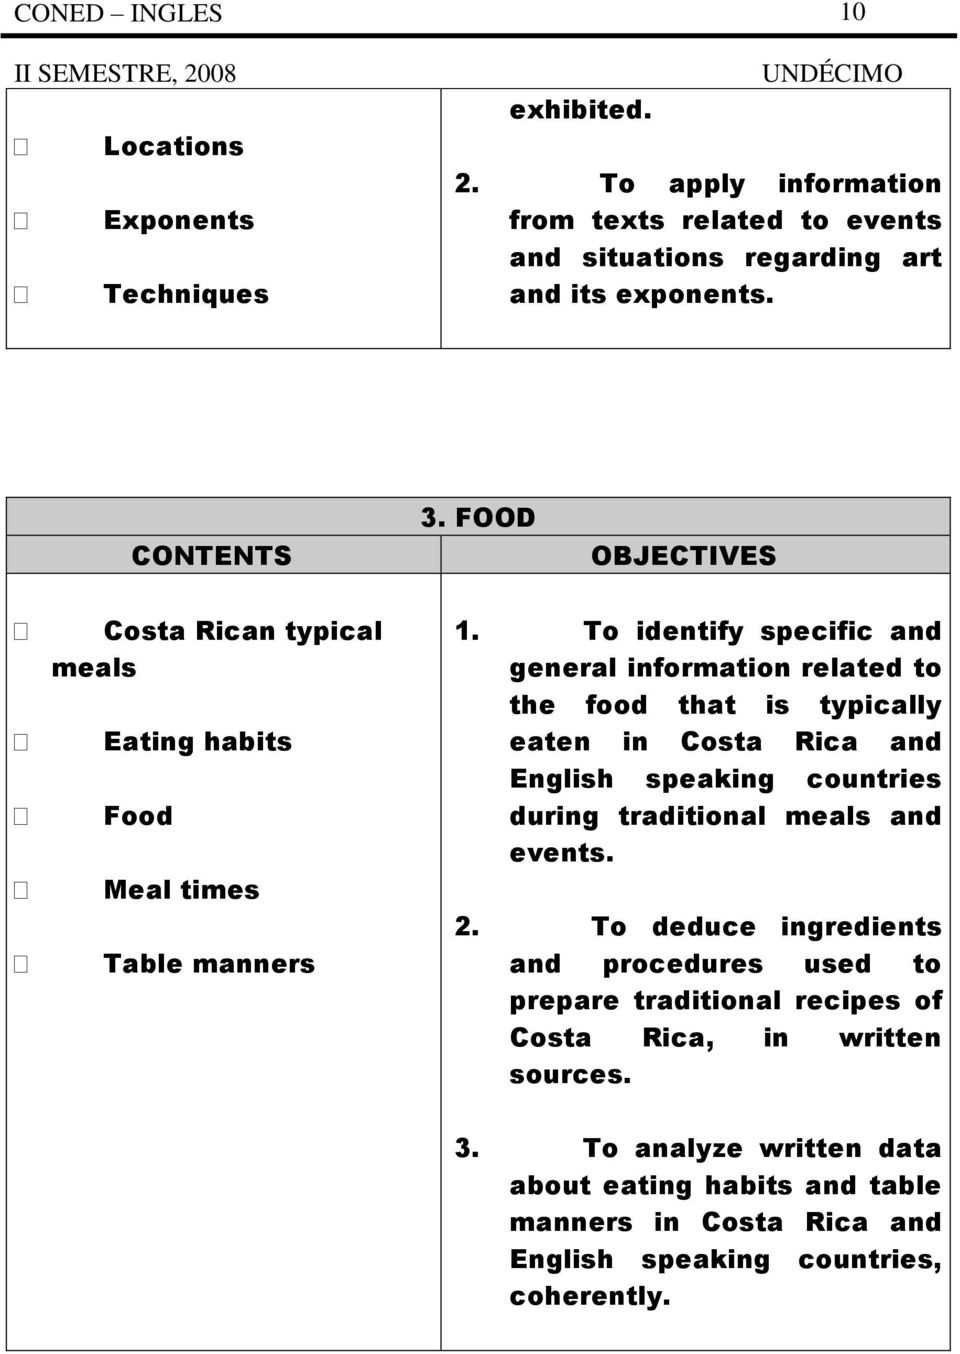 To identify specific and general information related to the food that is typically eaten in Costa Rica and English speaking countries during traditional meals and